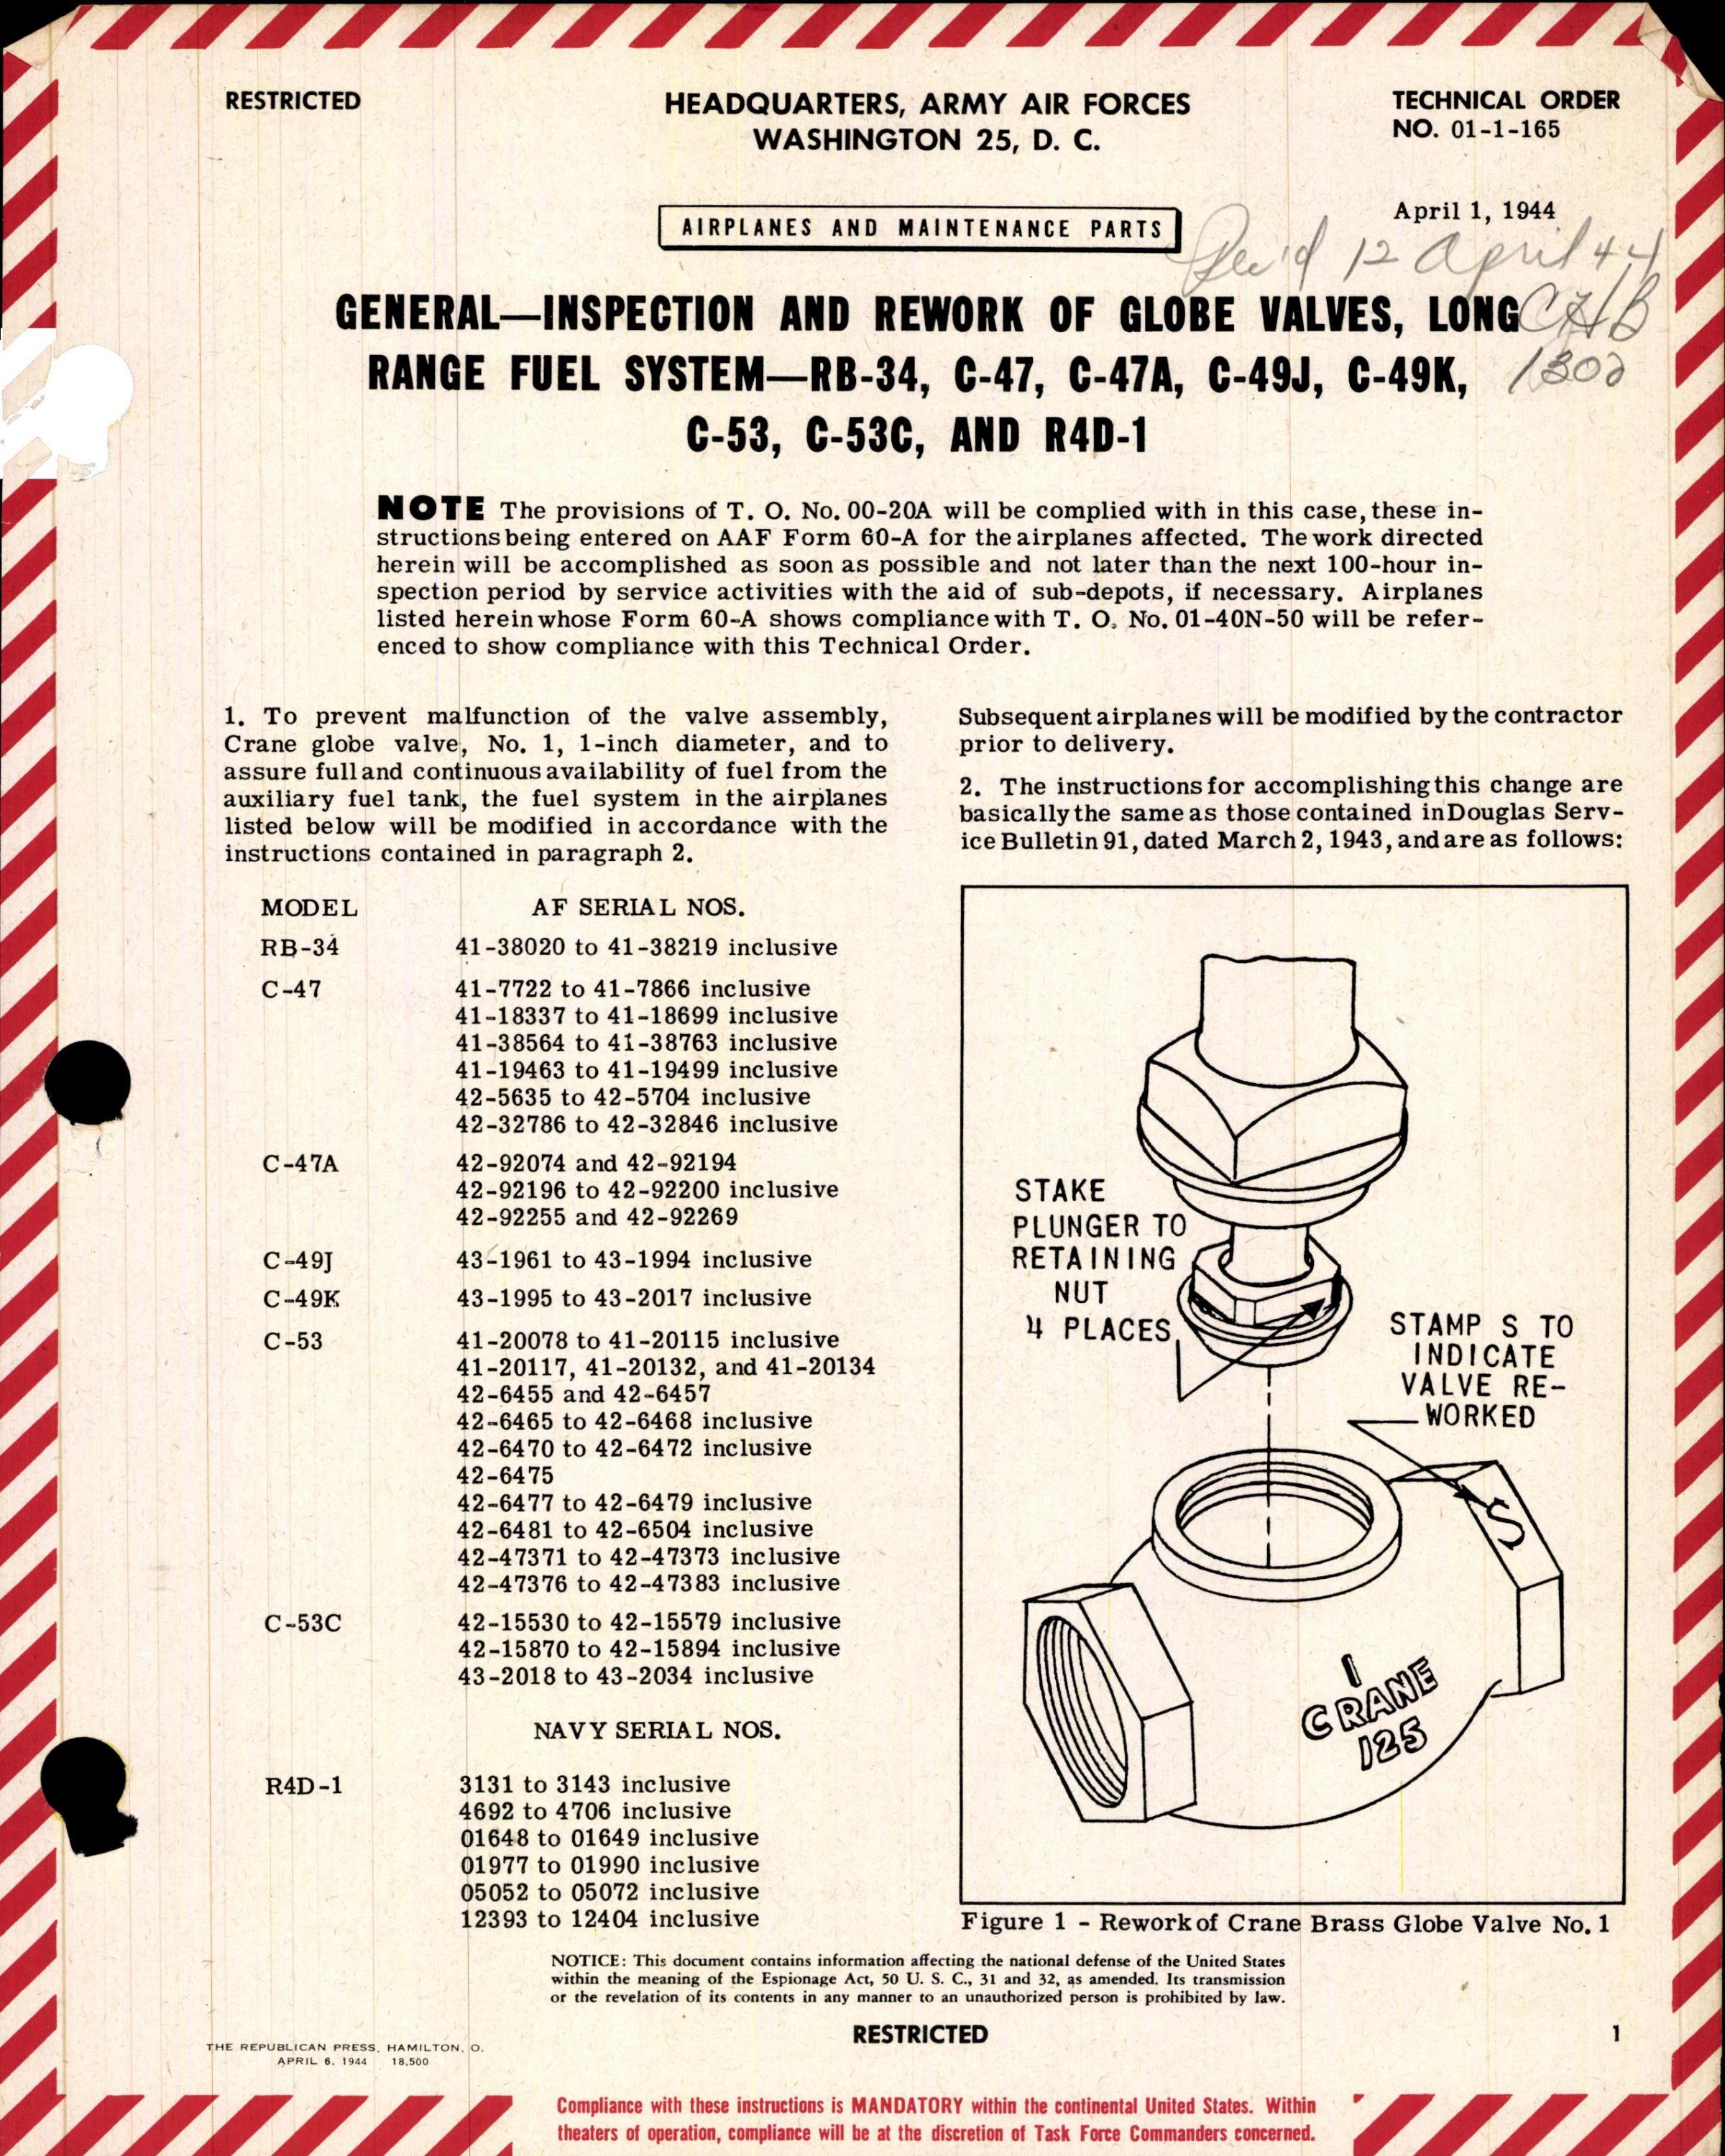 Sample page 1 from AirCorps Library document: Inspection & Rework of Globe Valves in Long Range Fuel System